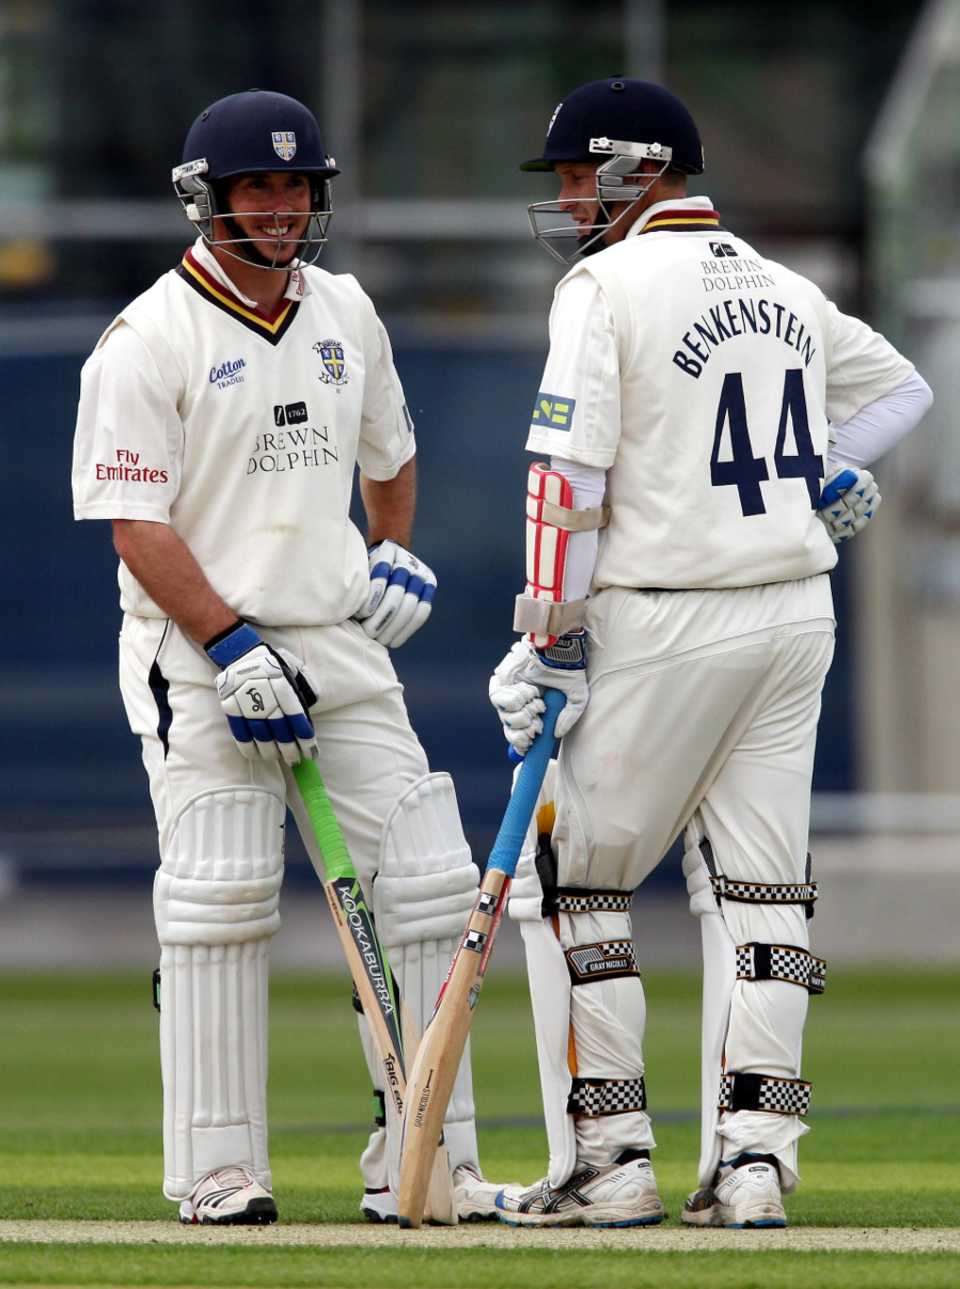 Will Smith and Dale Benkenstein put on a massive 273 for the fourth wicket, Warwickshire v Durham, County Championship Division One, Edgbaston, May 25 2011